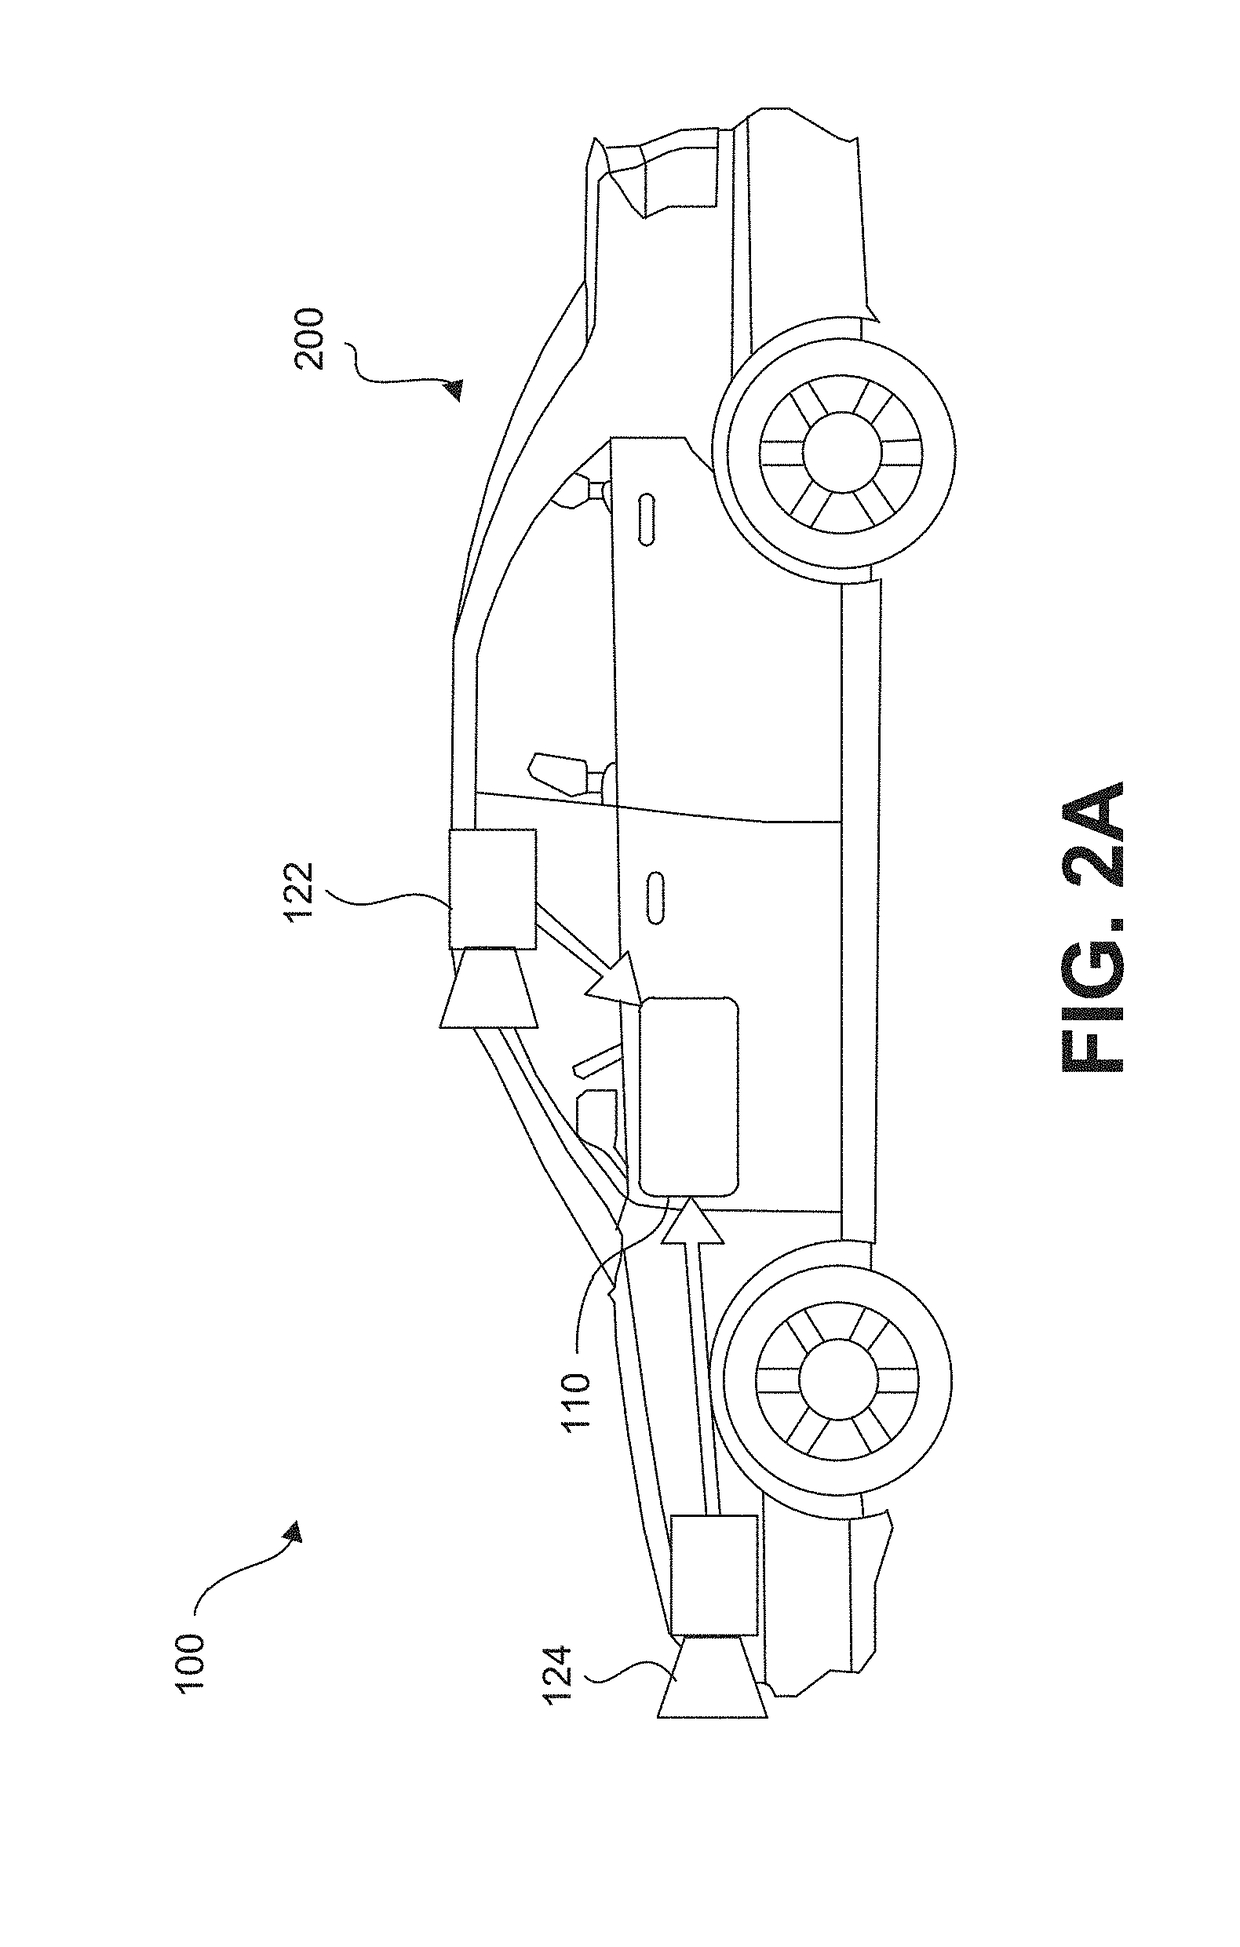 Controlling host vehicle based on detected spacing between stationary vehicles